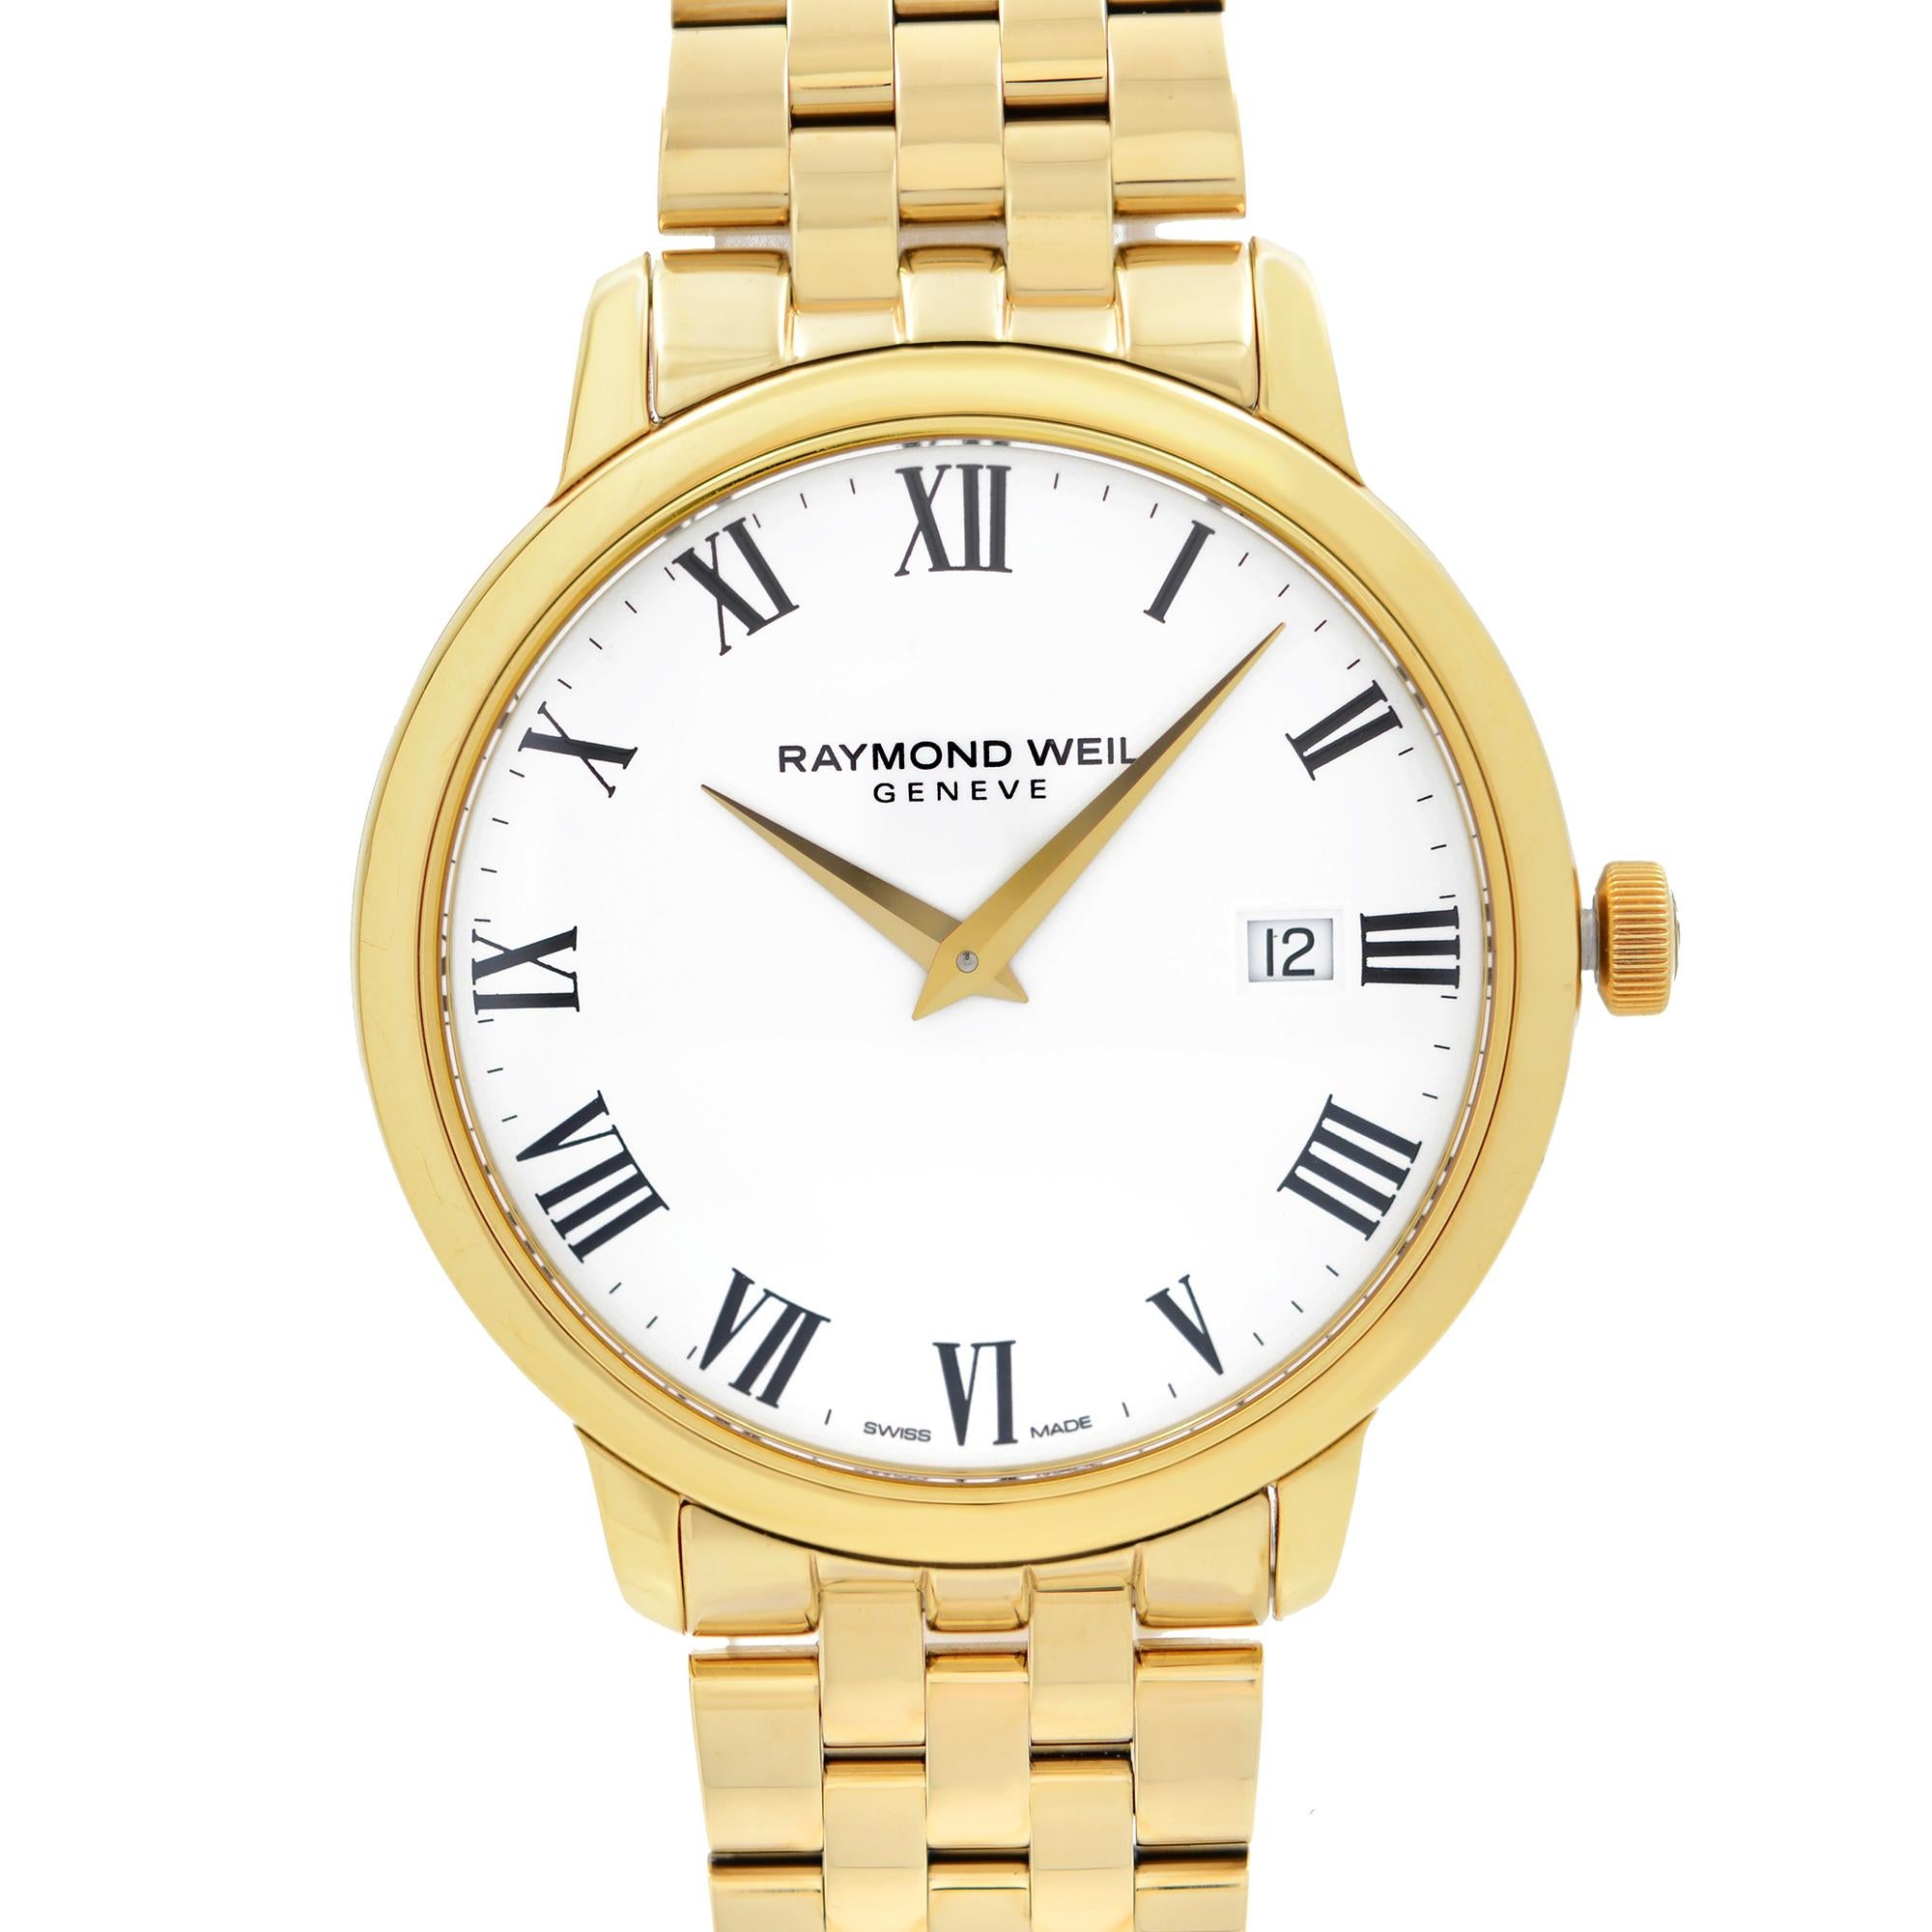 Store Display Model Raymond Weil Toccata Yellow Gold PVD Steel White Dial Men's Watch. The Watch Might have Minor Blemishes During Store Display. This Beautiful Timepiece Features: Yellow Gold PVD Stainless Steel Case and Bracelet, Fixed Yellow Gold